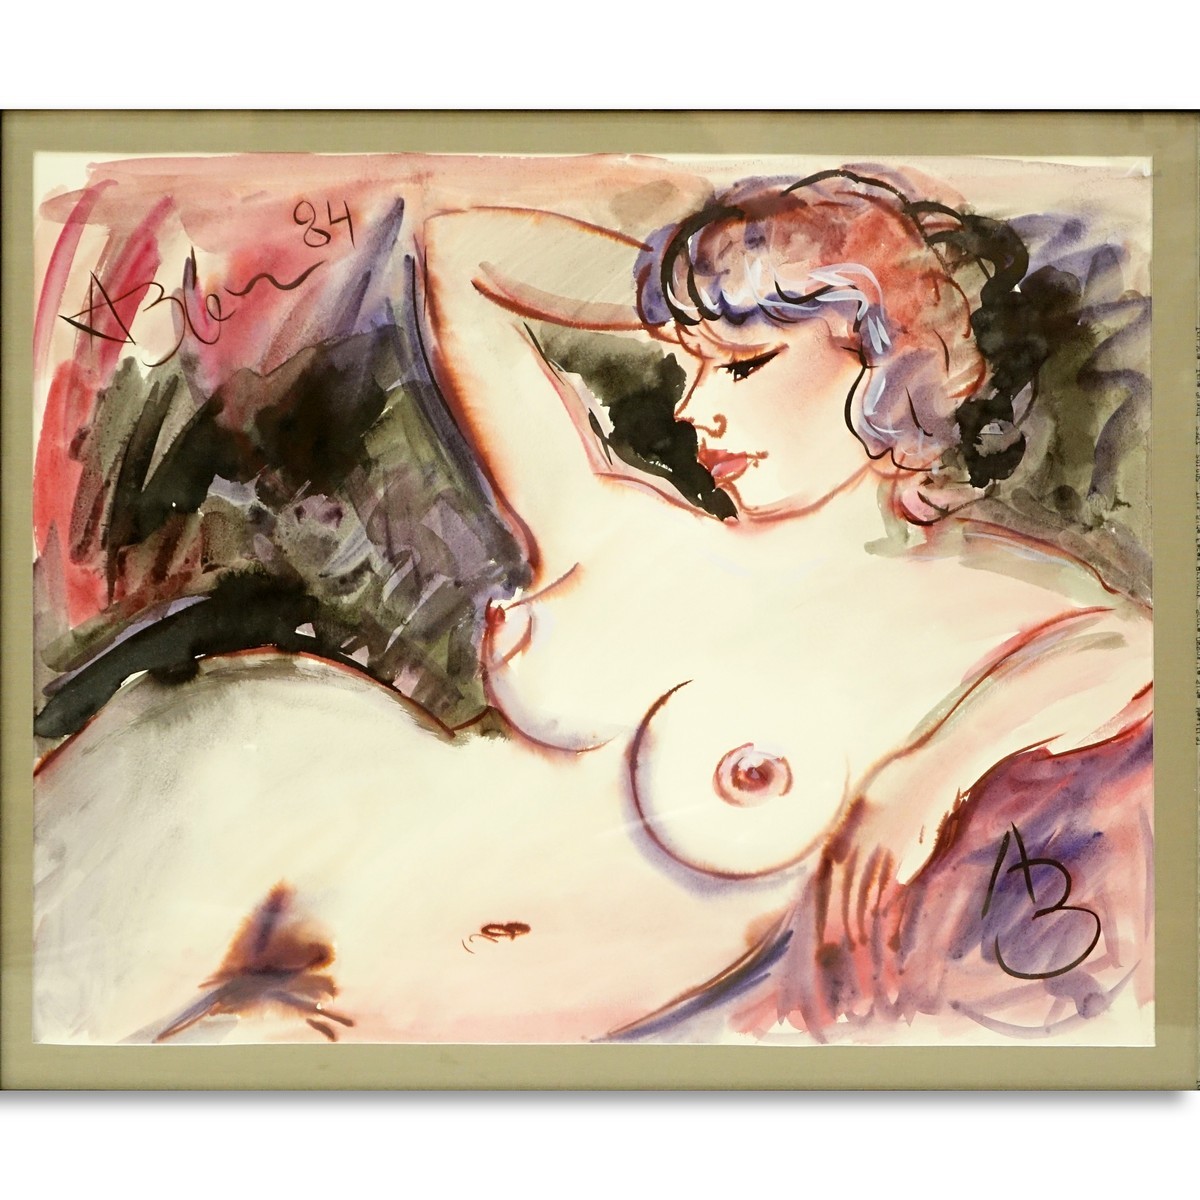 Attributed to: Anatoly Timofeivich Zverev, Russian. Watercolor on paper "Reclining Nude" Initialed and dated '84.